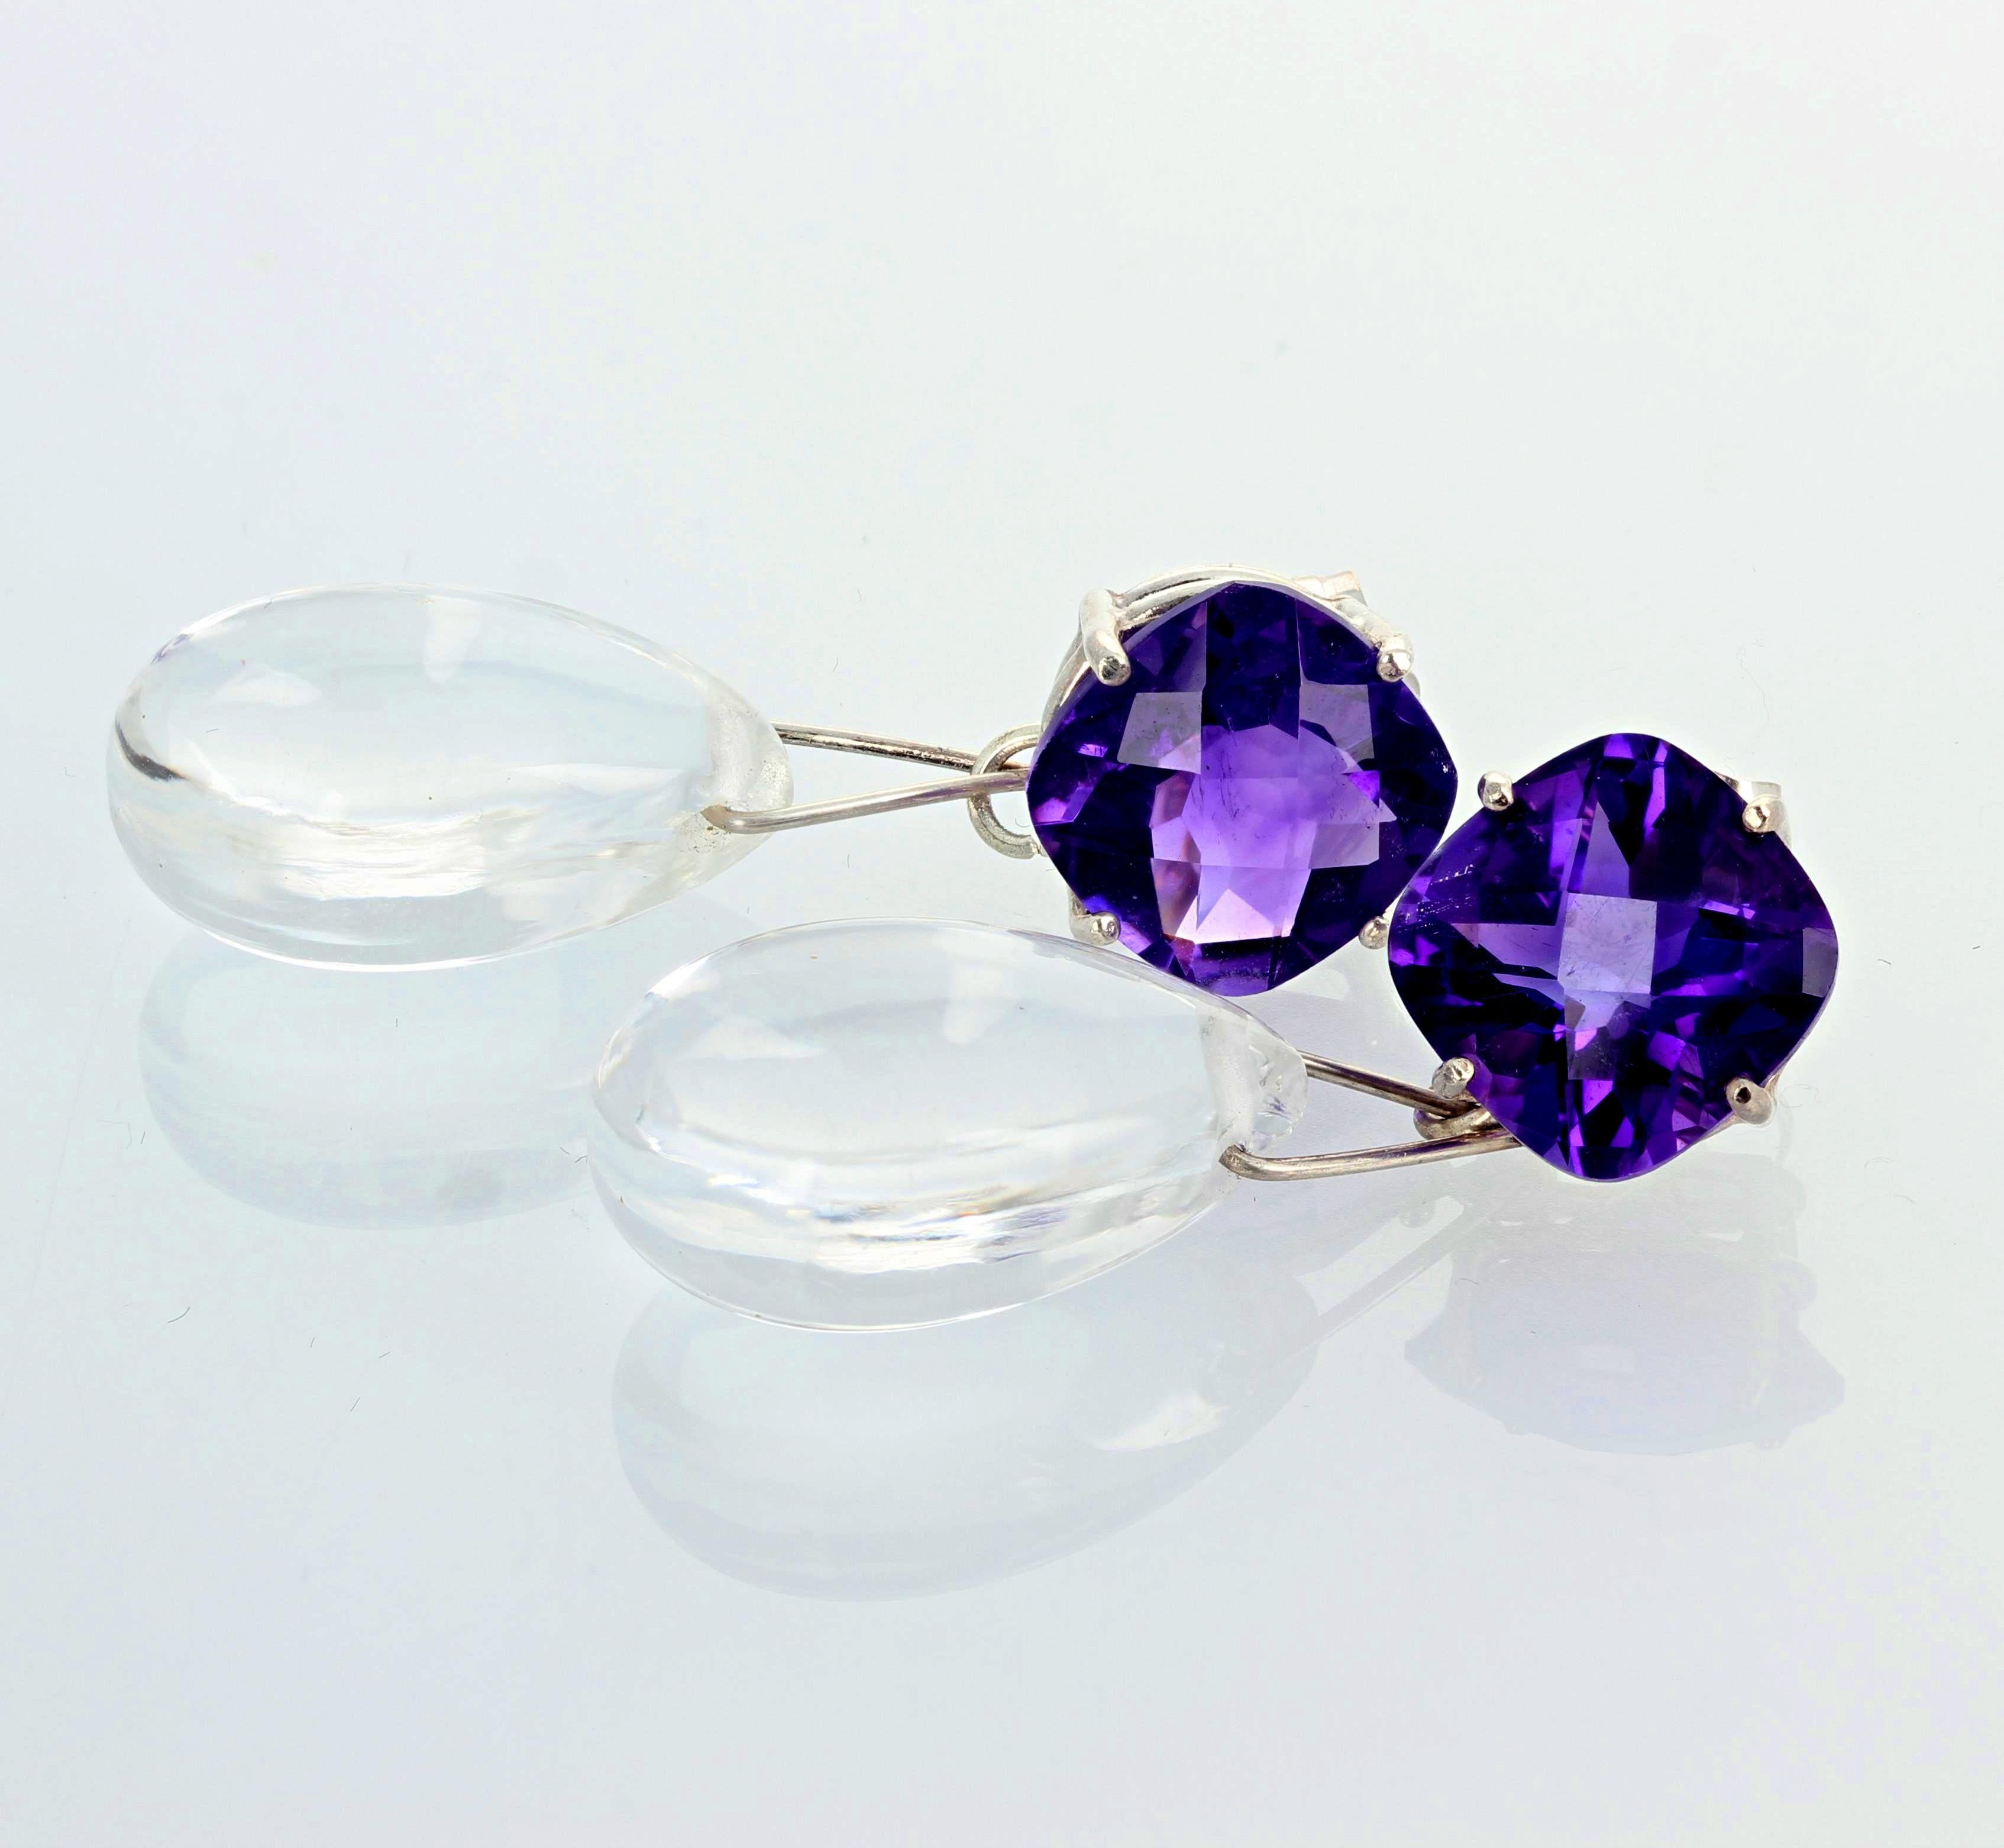 AJD Spectacular Glittering Amethyst &Silver Quartz Dangle Cocktail Earrings In New Condition For Sale In Raleigh, NC